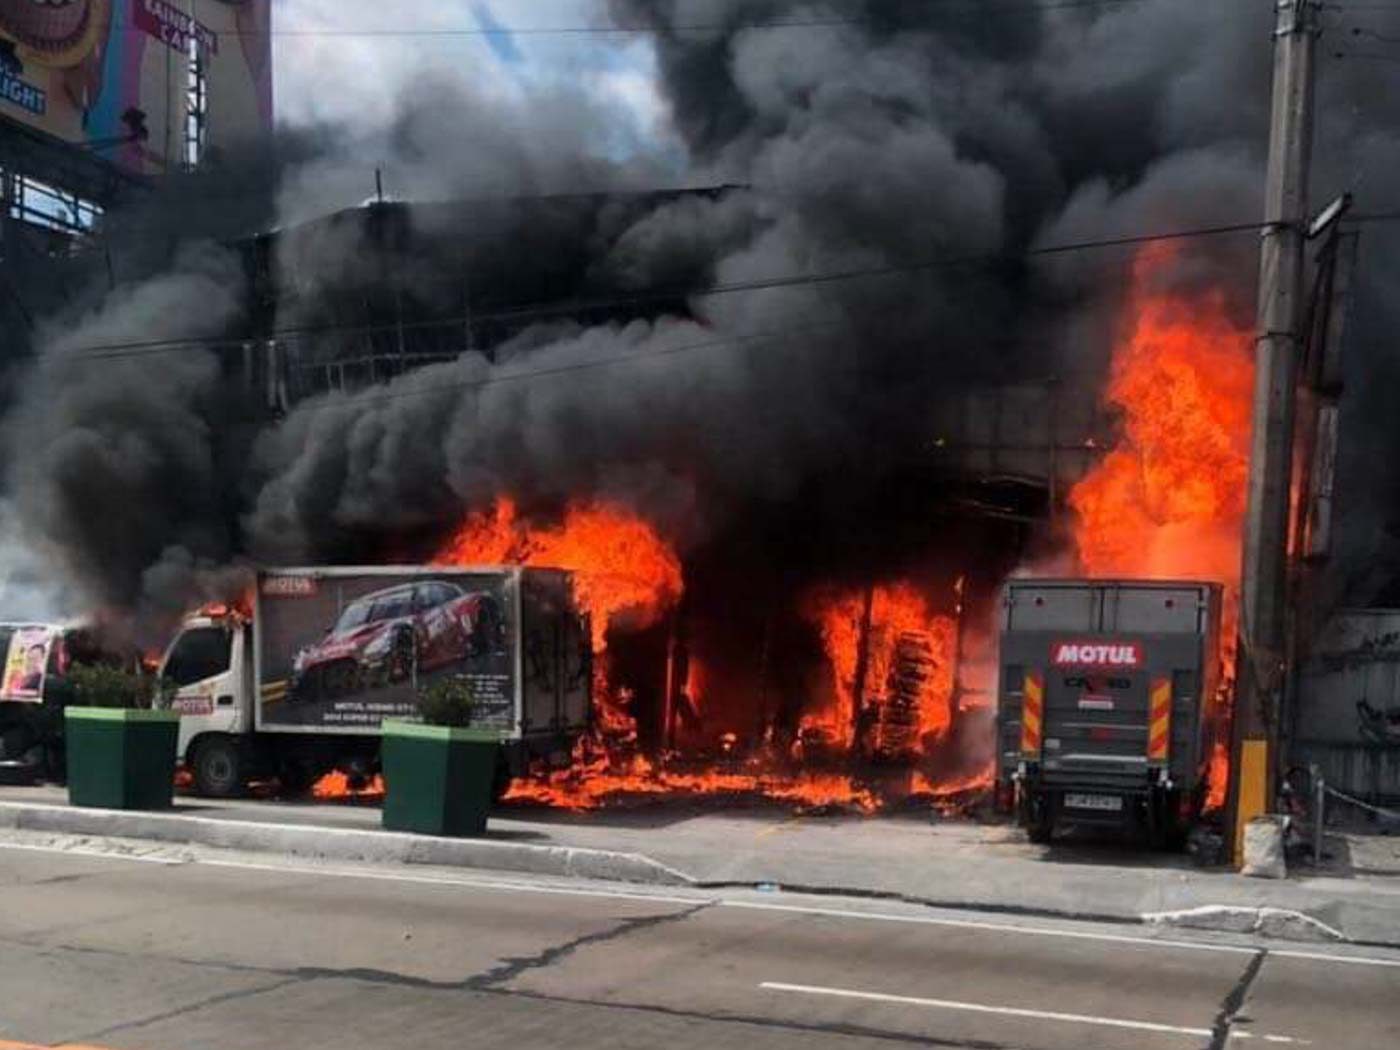 JV Ejercito’s SUV razed in Mandaluyong auto shop fire